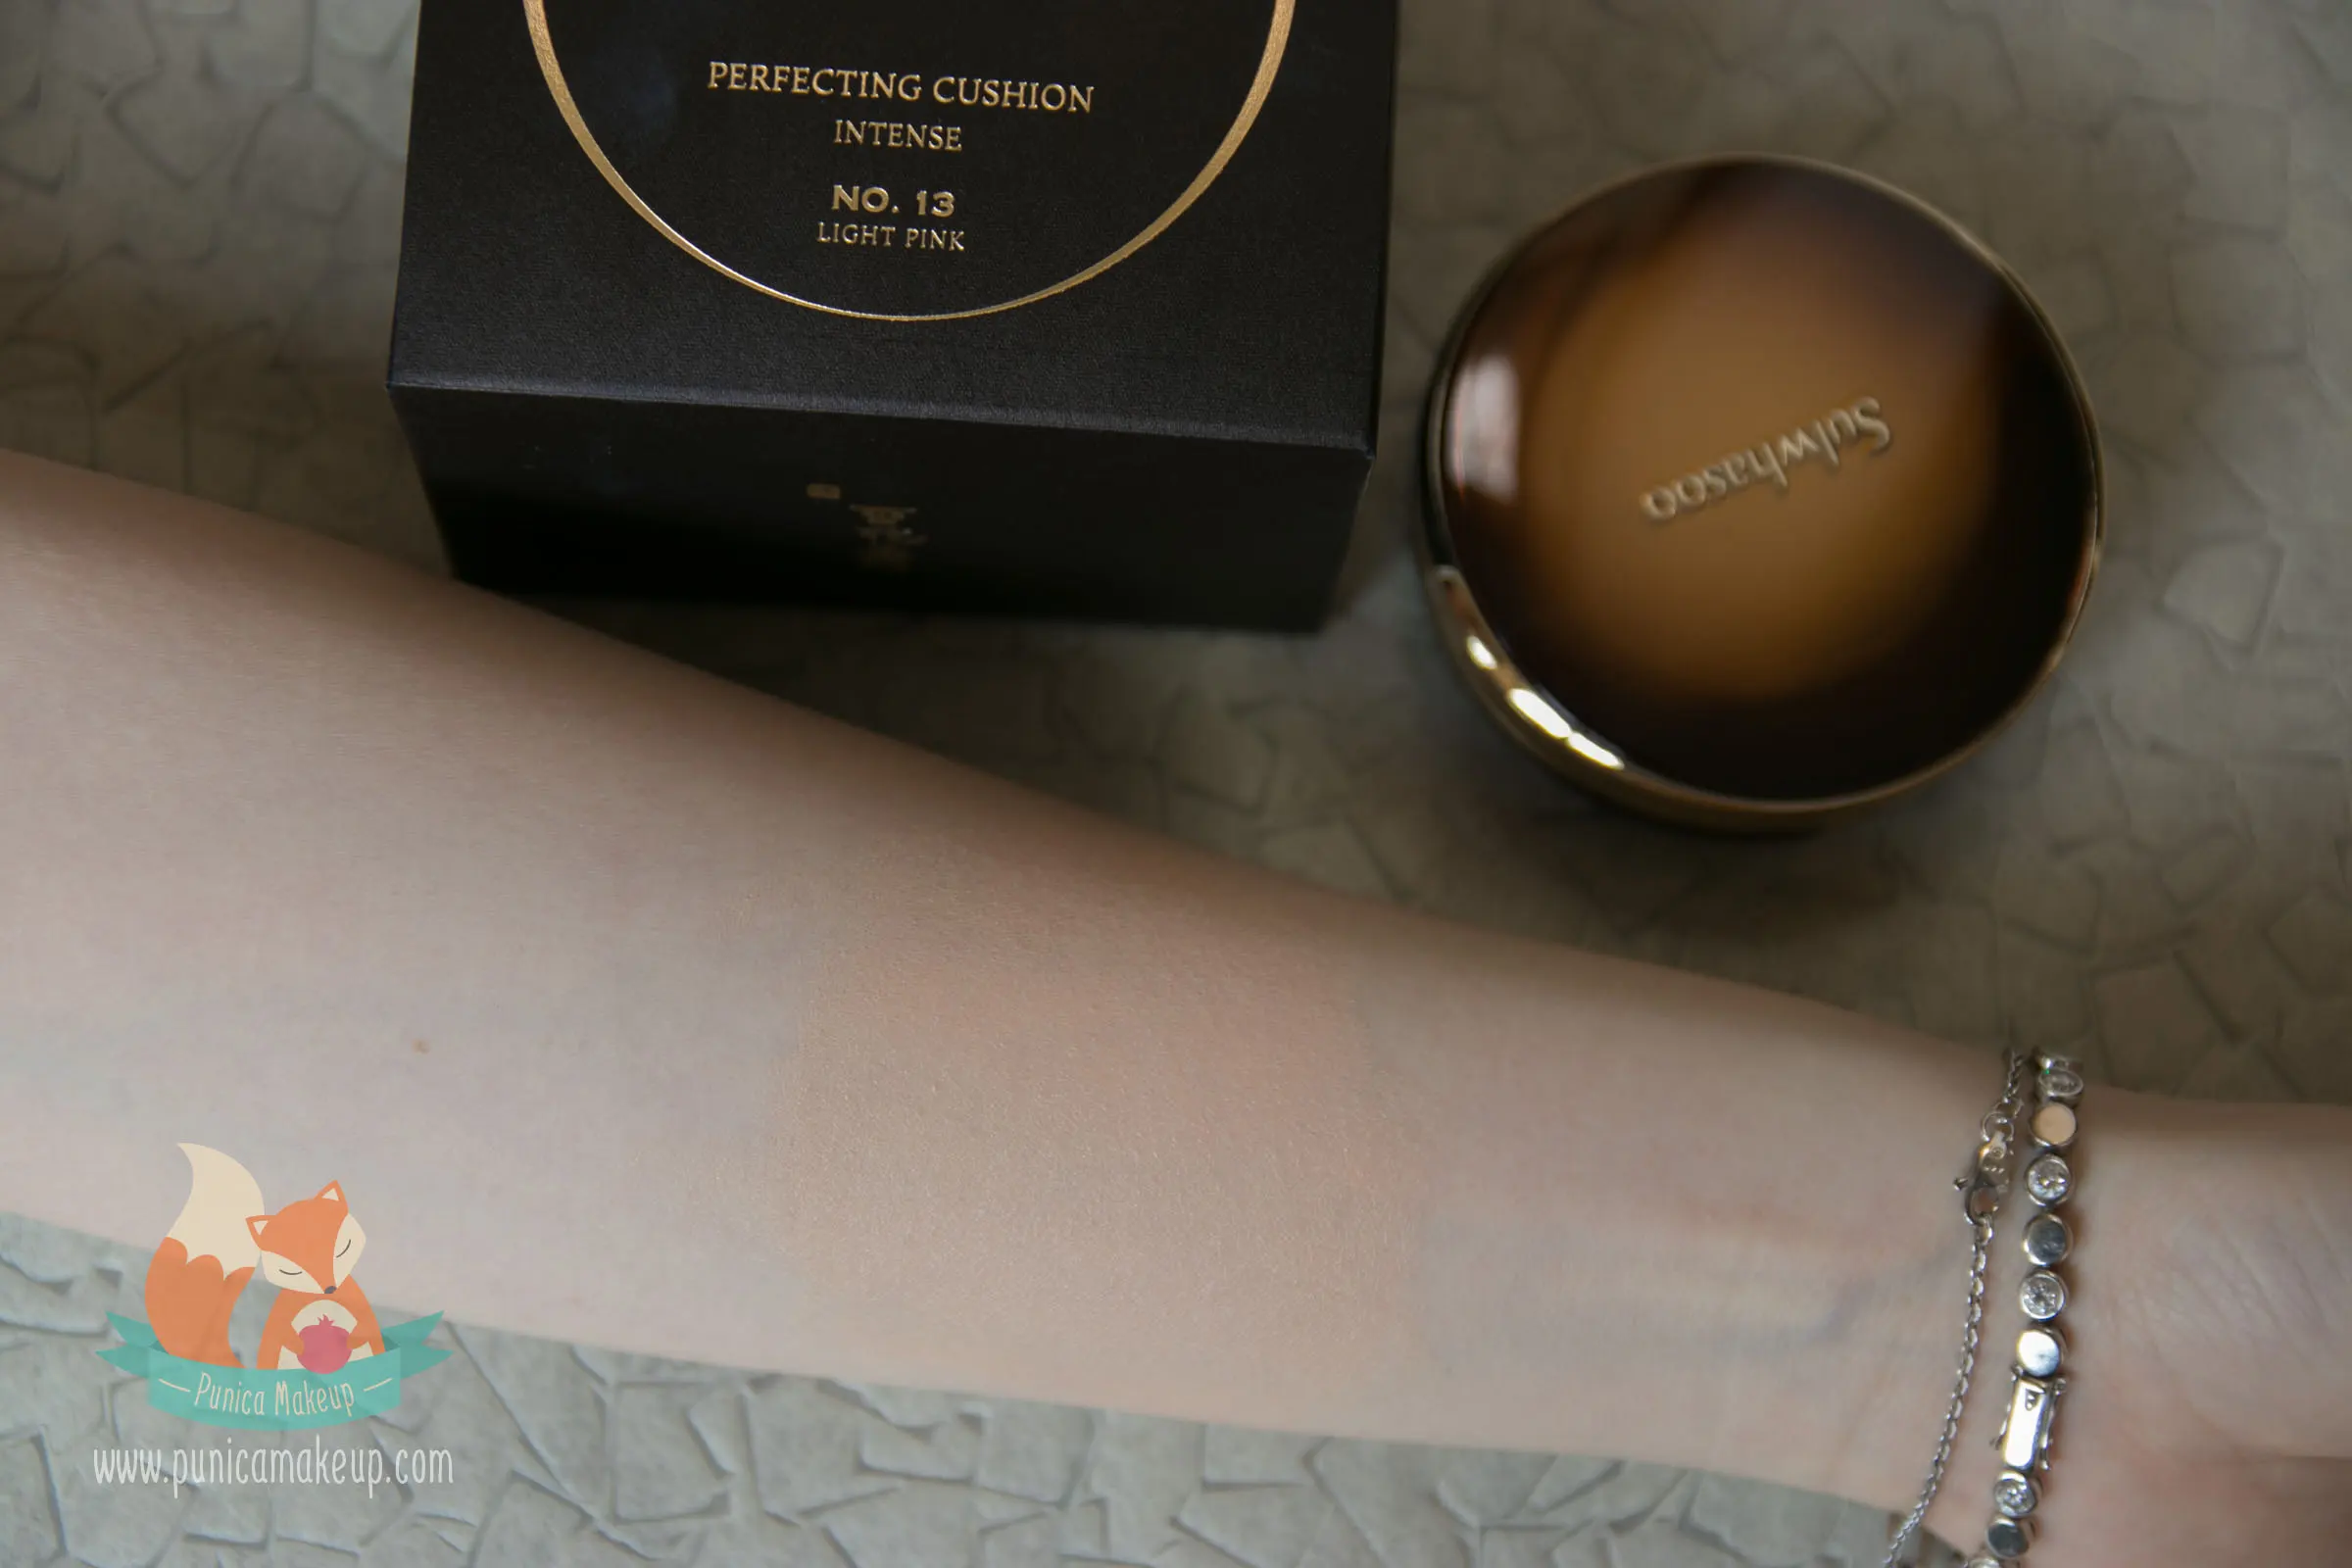 Sulwhasoo Perfecting Cushion Intense tested on my hand